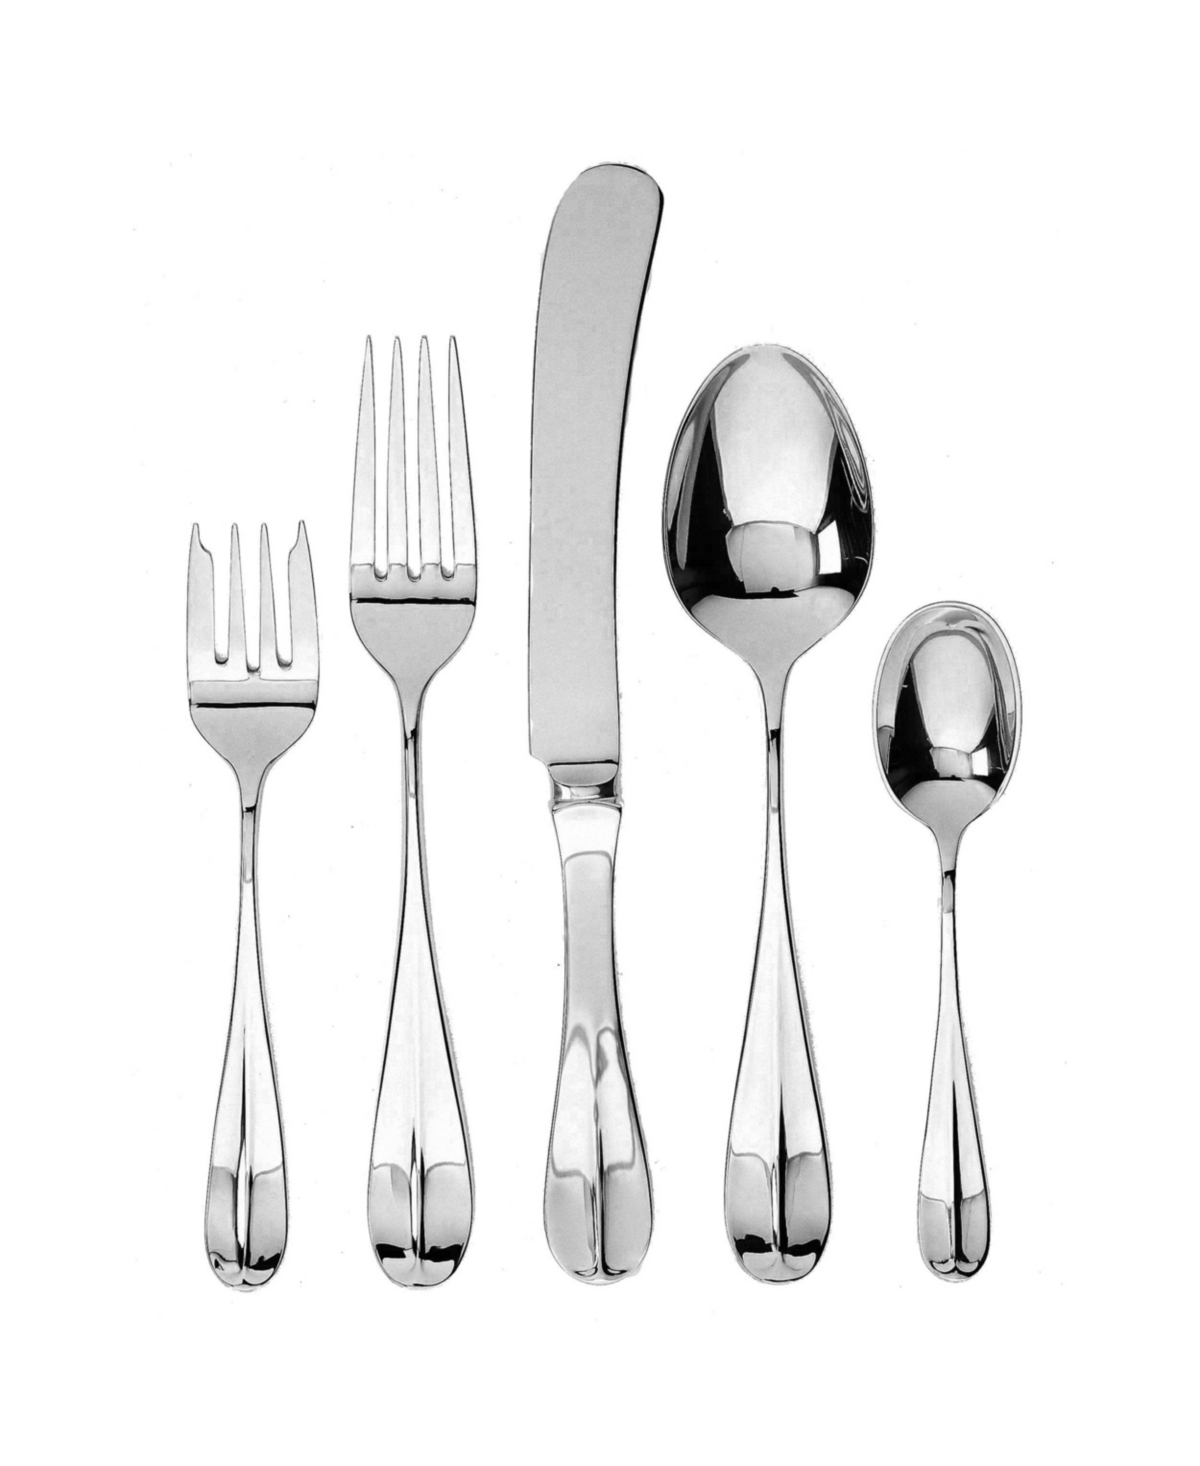 Ginkgo Classic English Flatware 20 Piece Set, Service For 4 In Silver